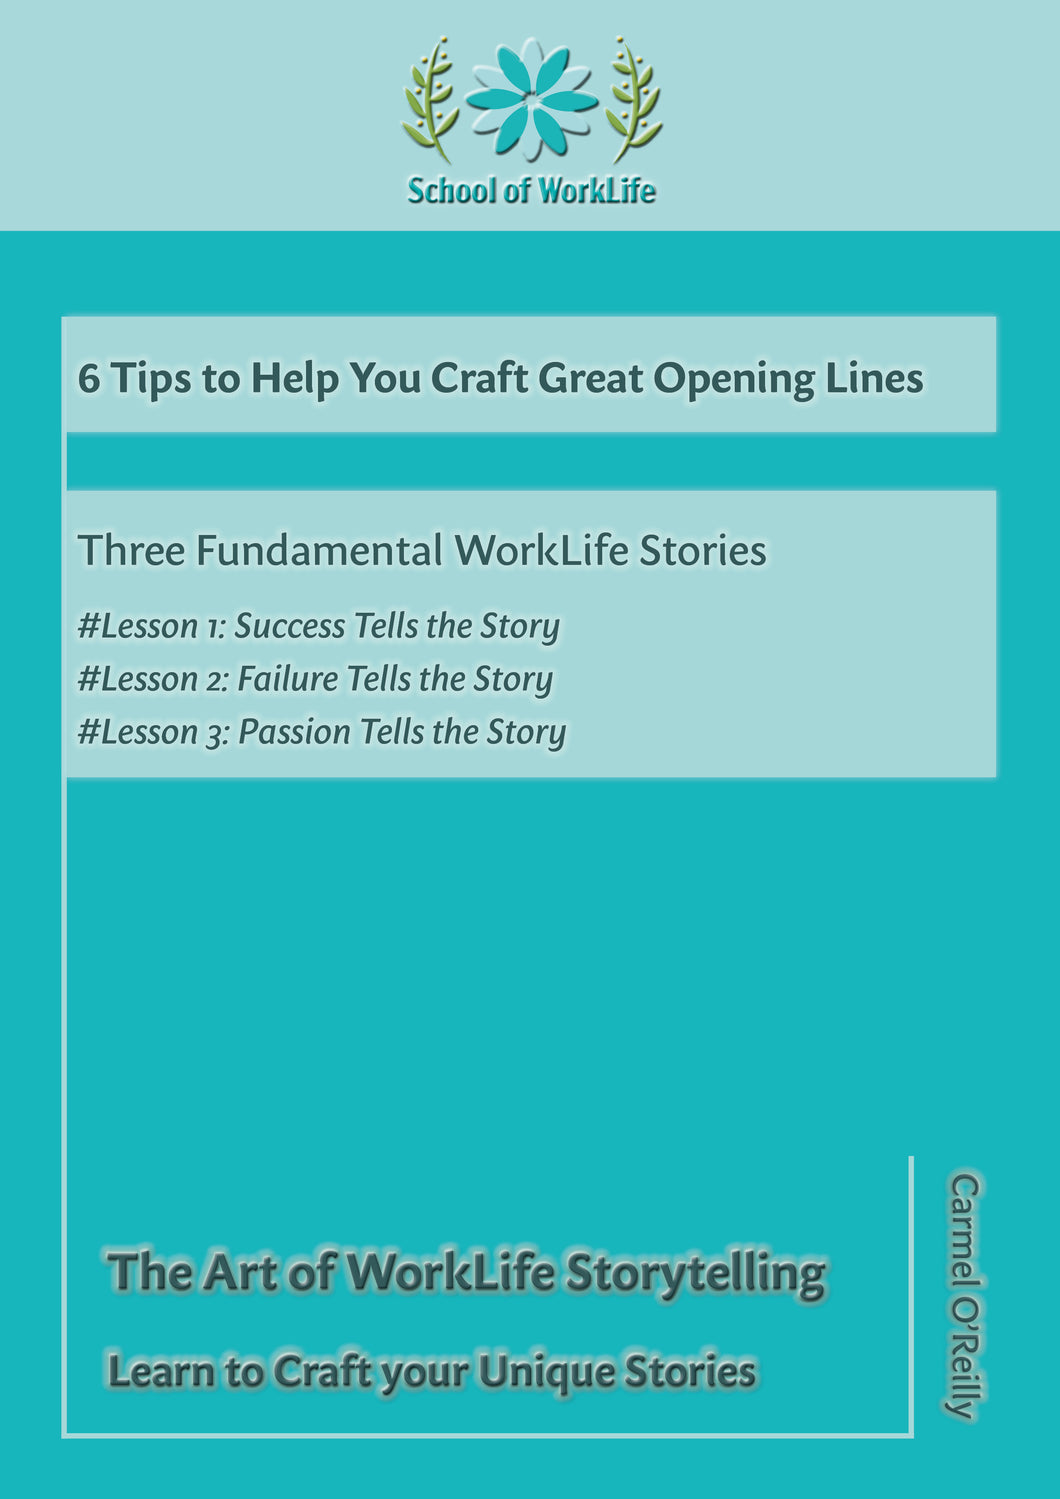 6 Tips to Help You Craft Great Opening Lines